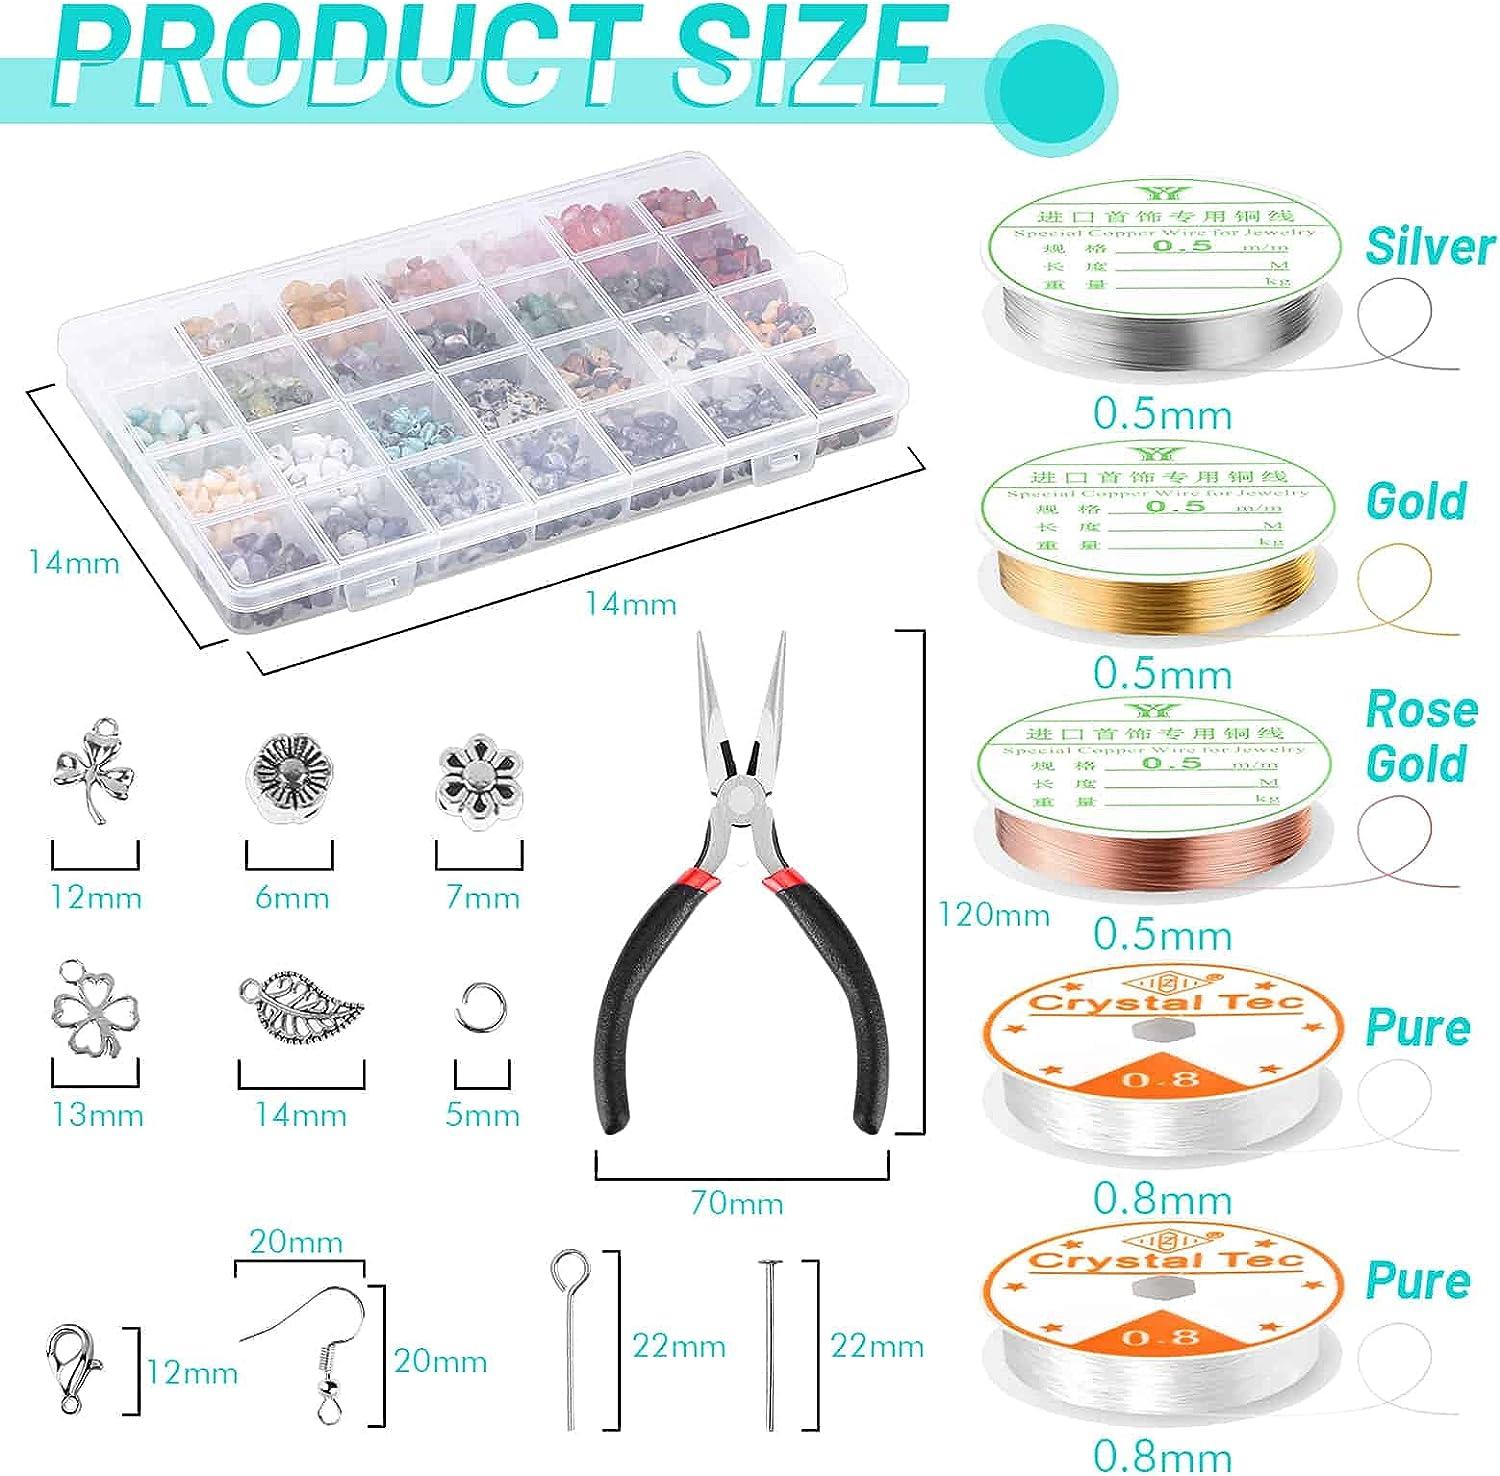 selizo Jewelry Making Supplies Kit for Adults Women with Crystal Beads,  Ring Making Kit Earring Kit Necklace Making kit with Jewelry Wire, Pliers  and